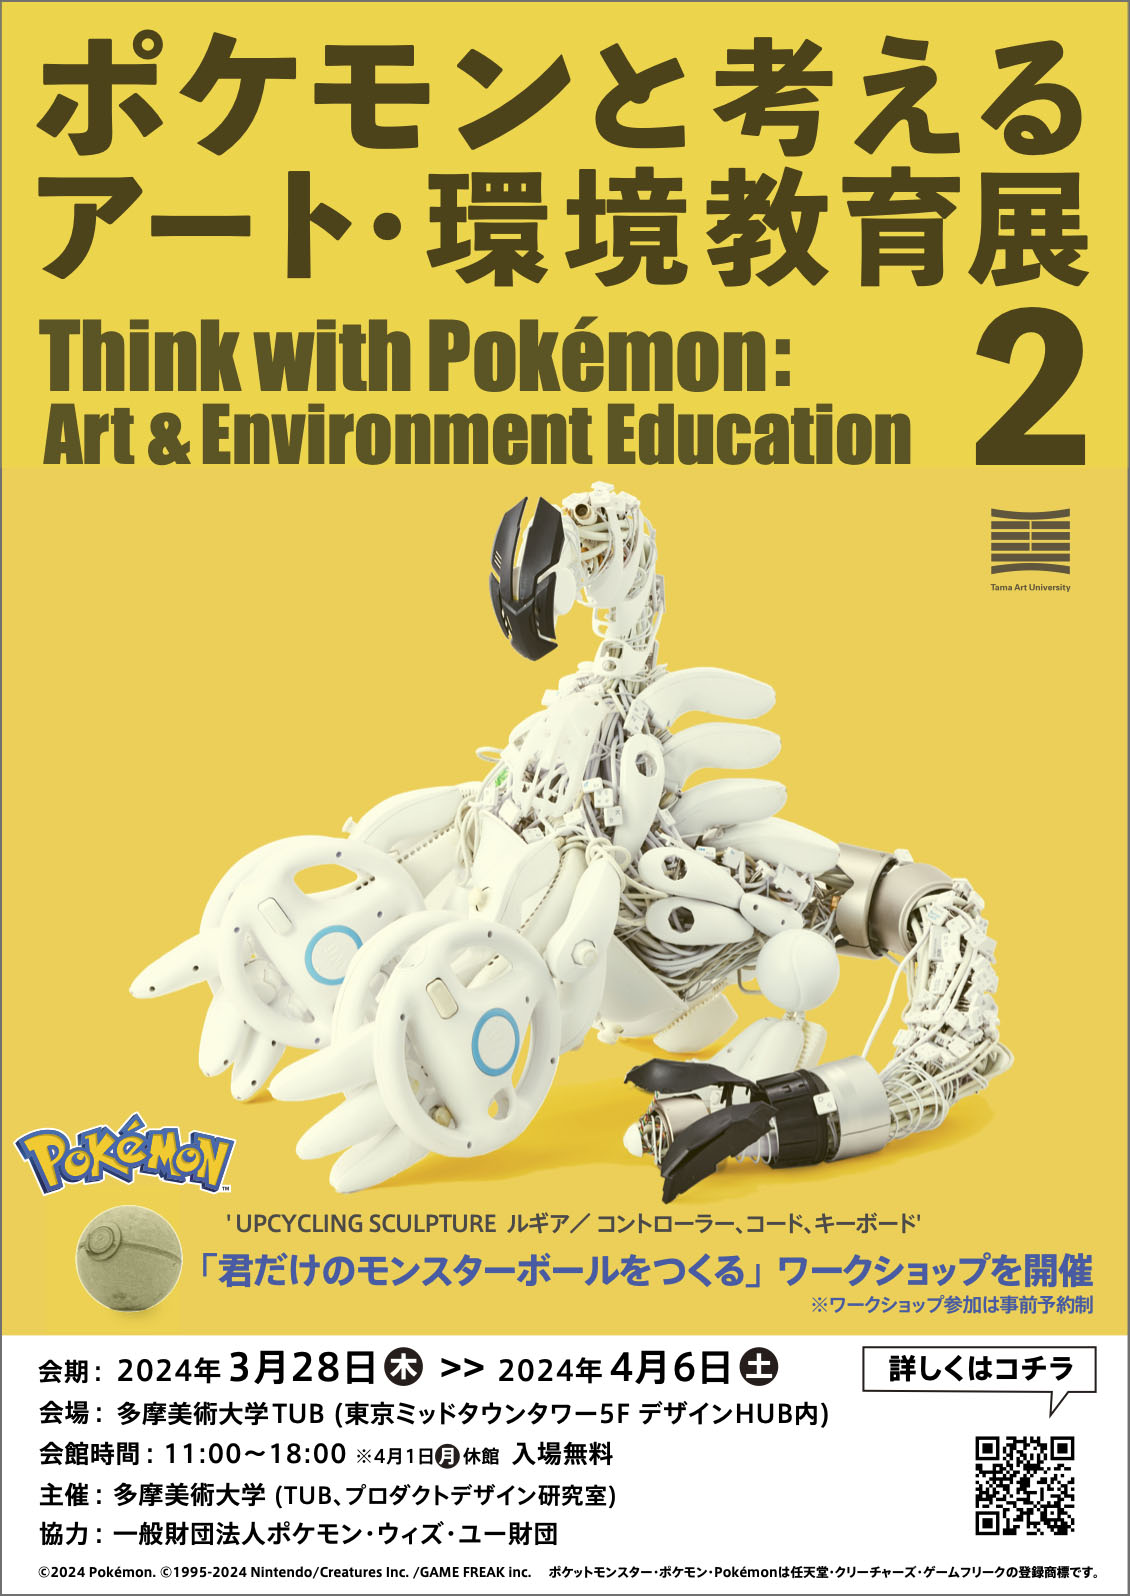 Think with Pokemon art exhibit 2 upcycling sculpture - Lugia